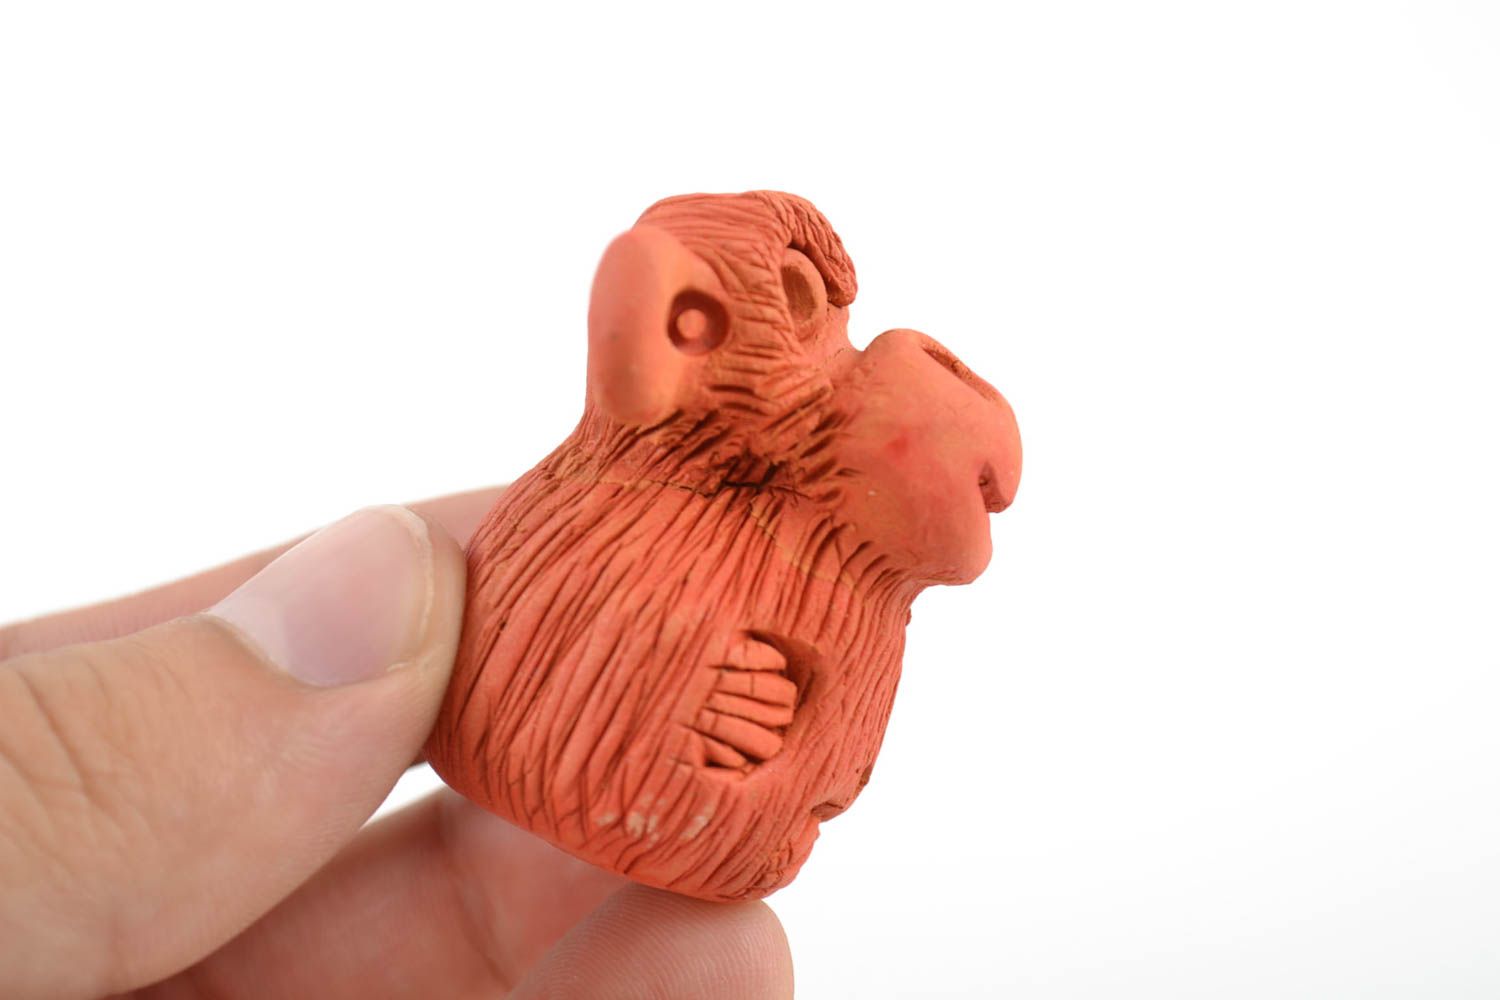 Ceramic statuette of monkey made of red clay handmade decorative home figurine photo 2